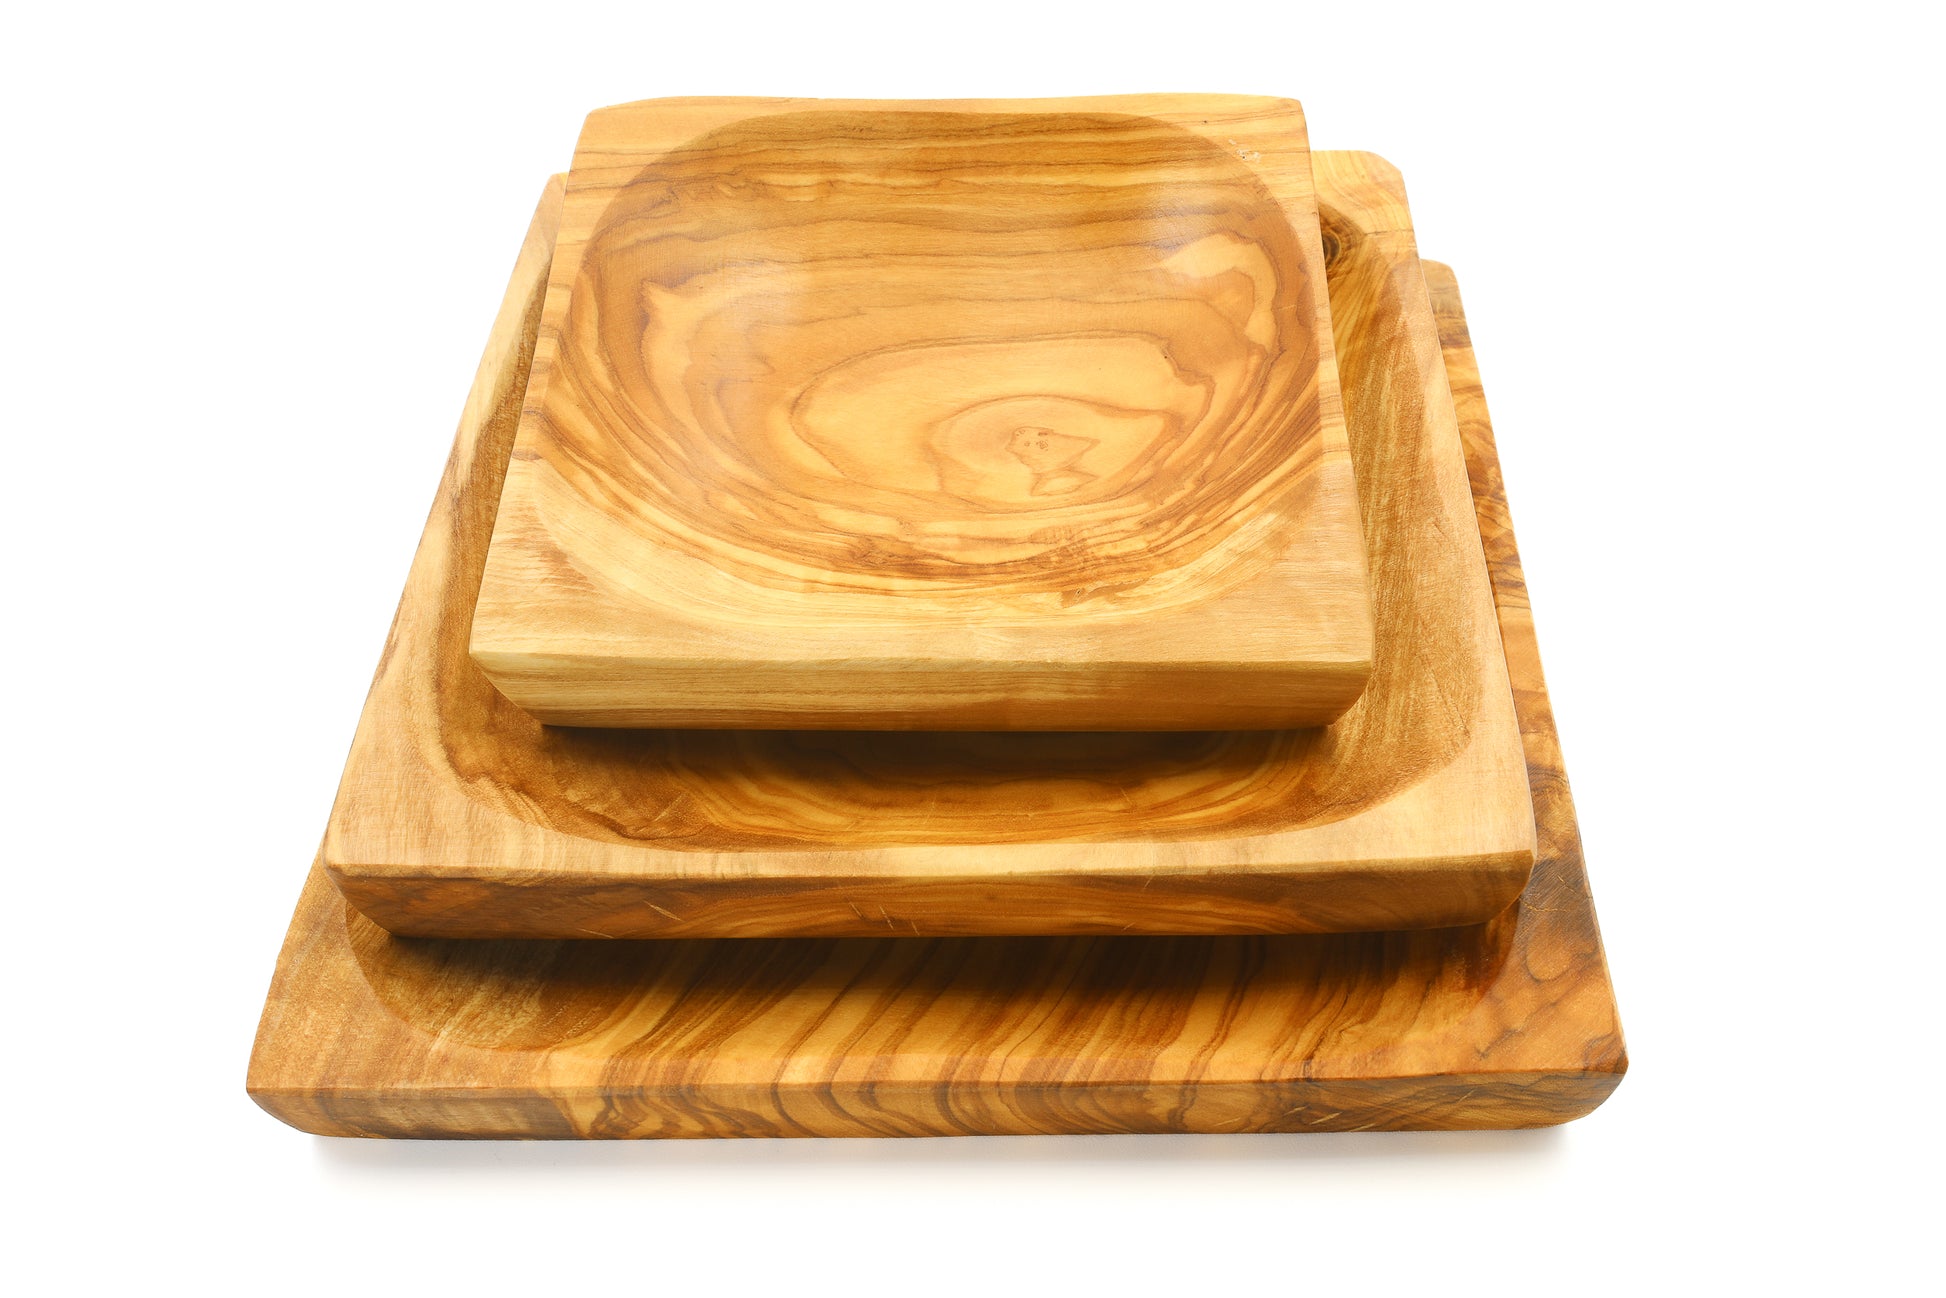 Wooden square and rectangular dishes in olive wood